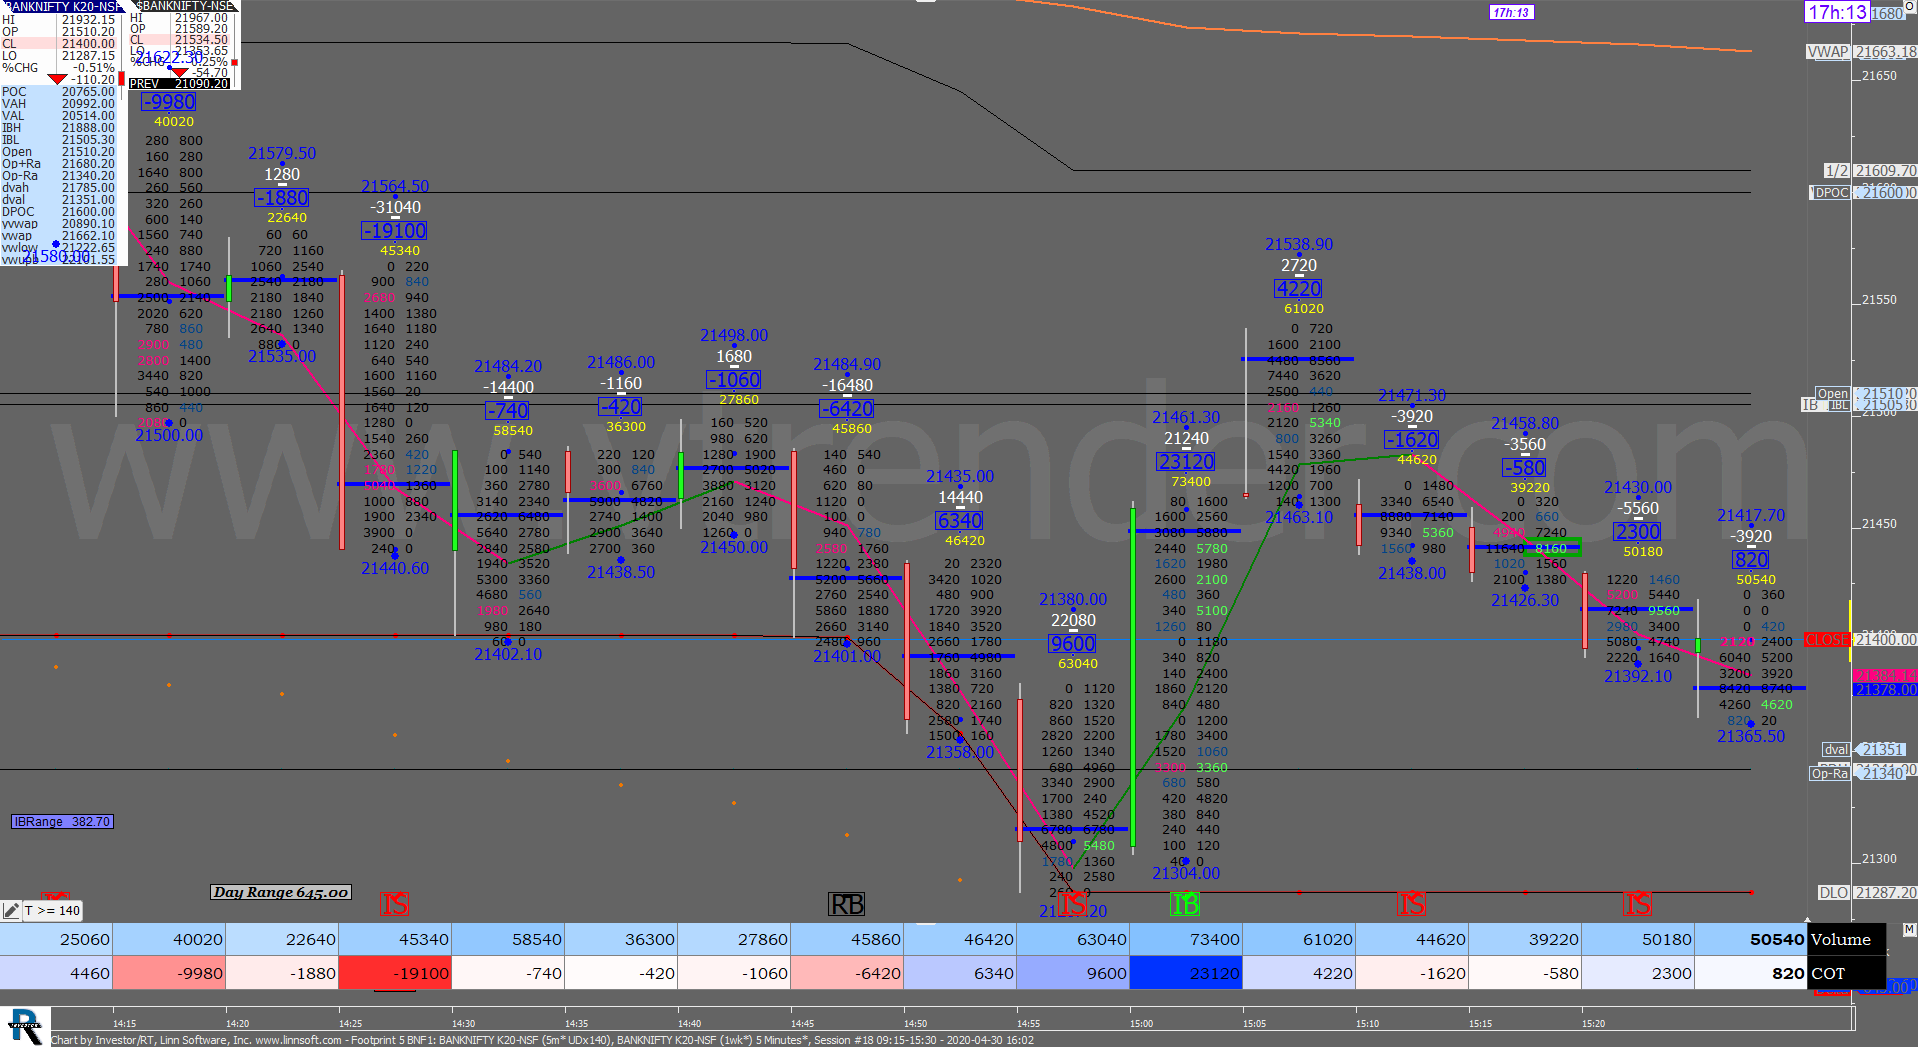 5 35 Order Flow Charts Dated 30Th Apr 2020 (5 Mins) Banknifty Futures, Day Trading, Intraday Trading, Intraday Trading Strategies, Nifty Futures, Order Flow Analysis, Support And Resistance, Trading Strategies, Volume Profile Trading